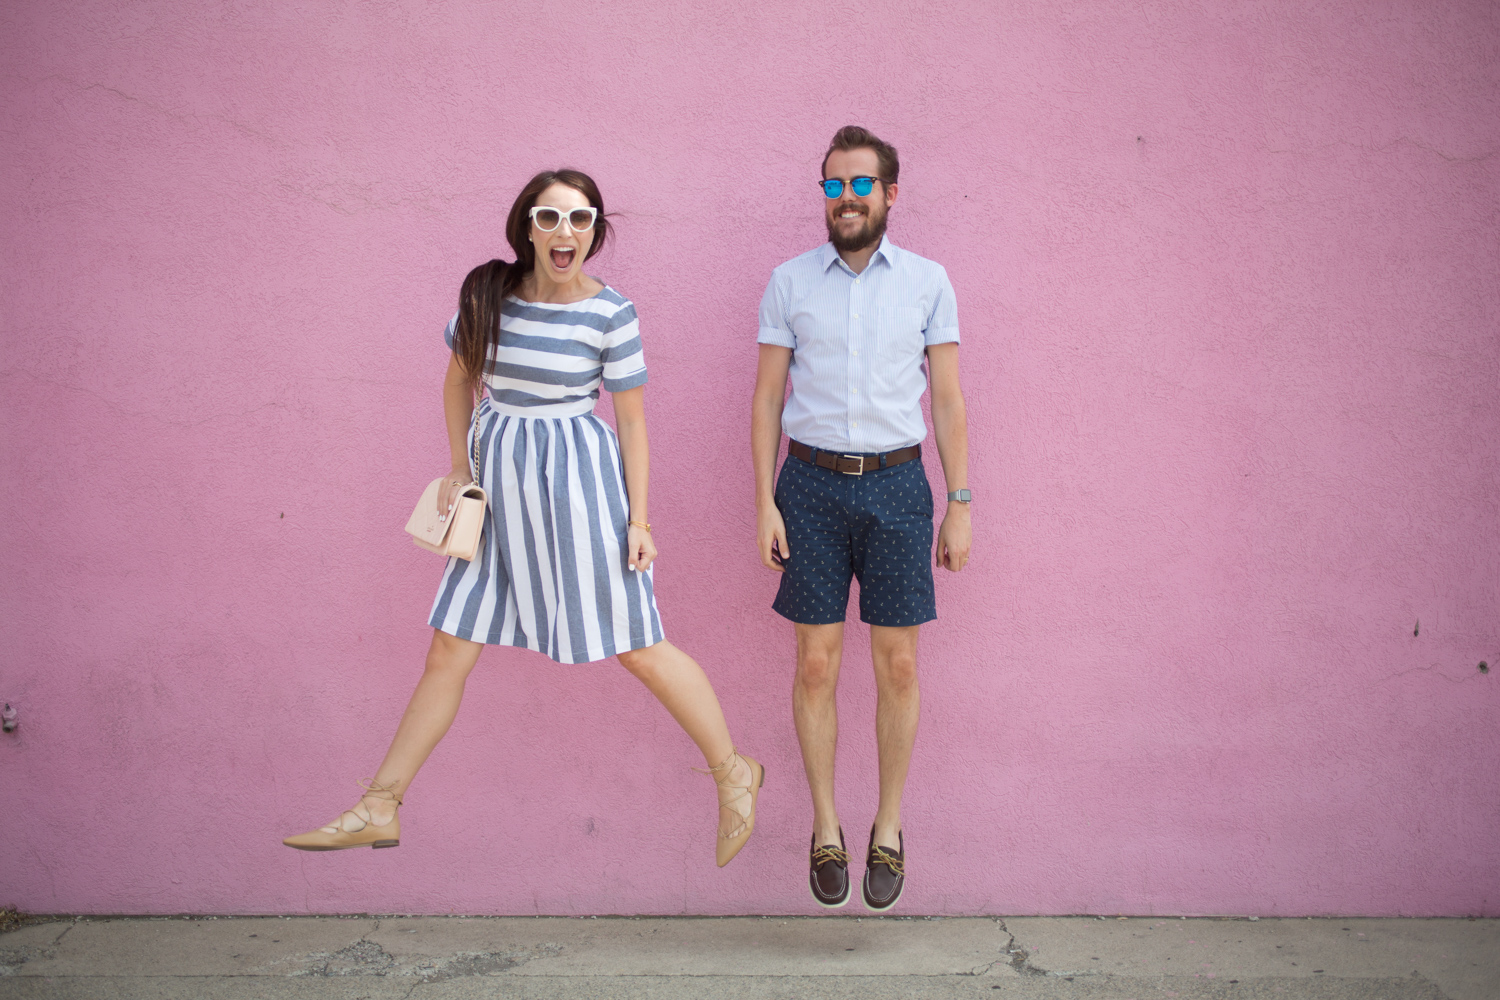 Kelseybang.com- A his and her style blog